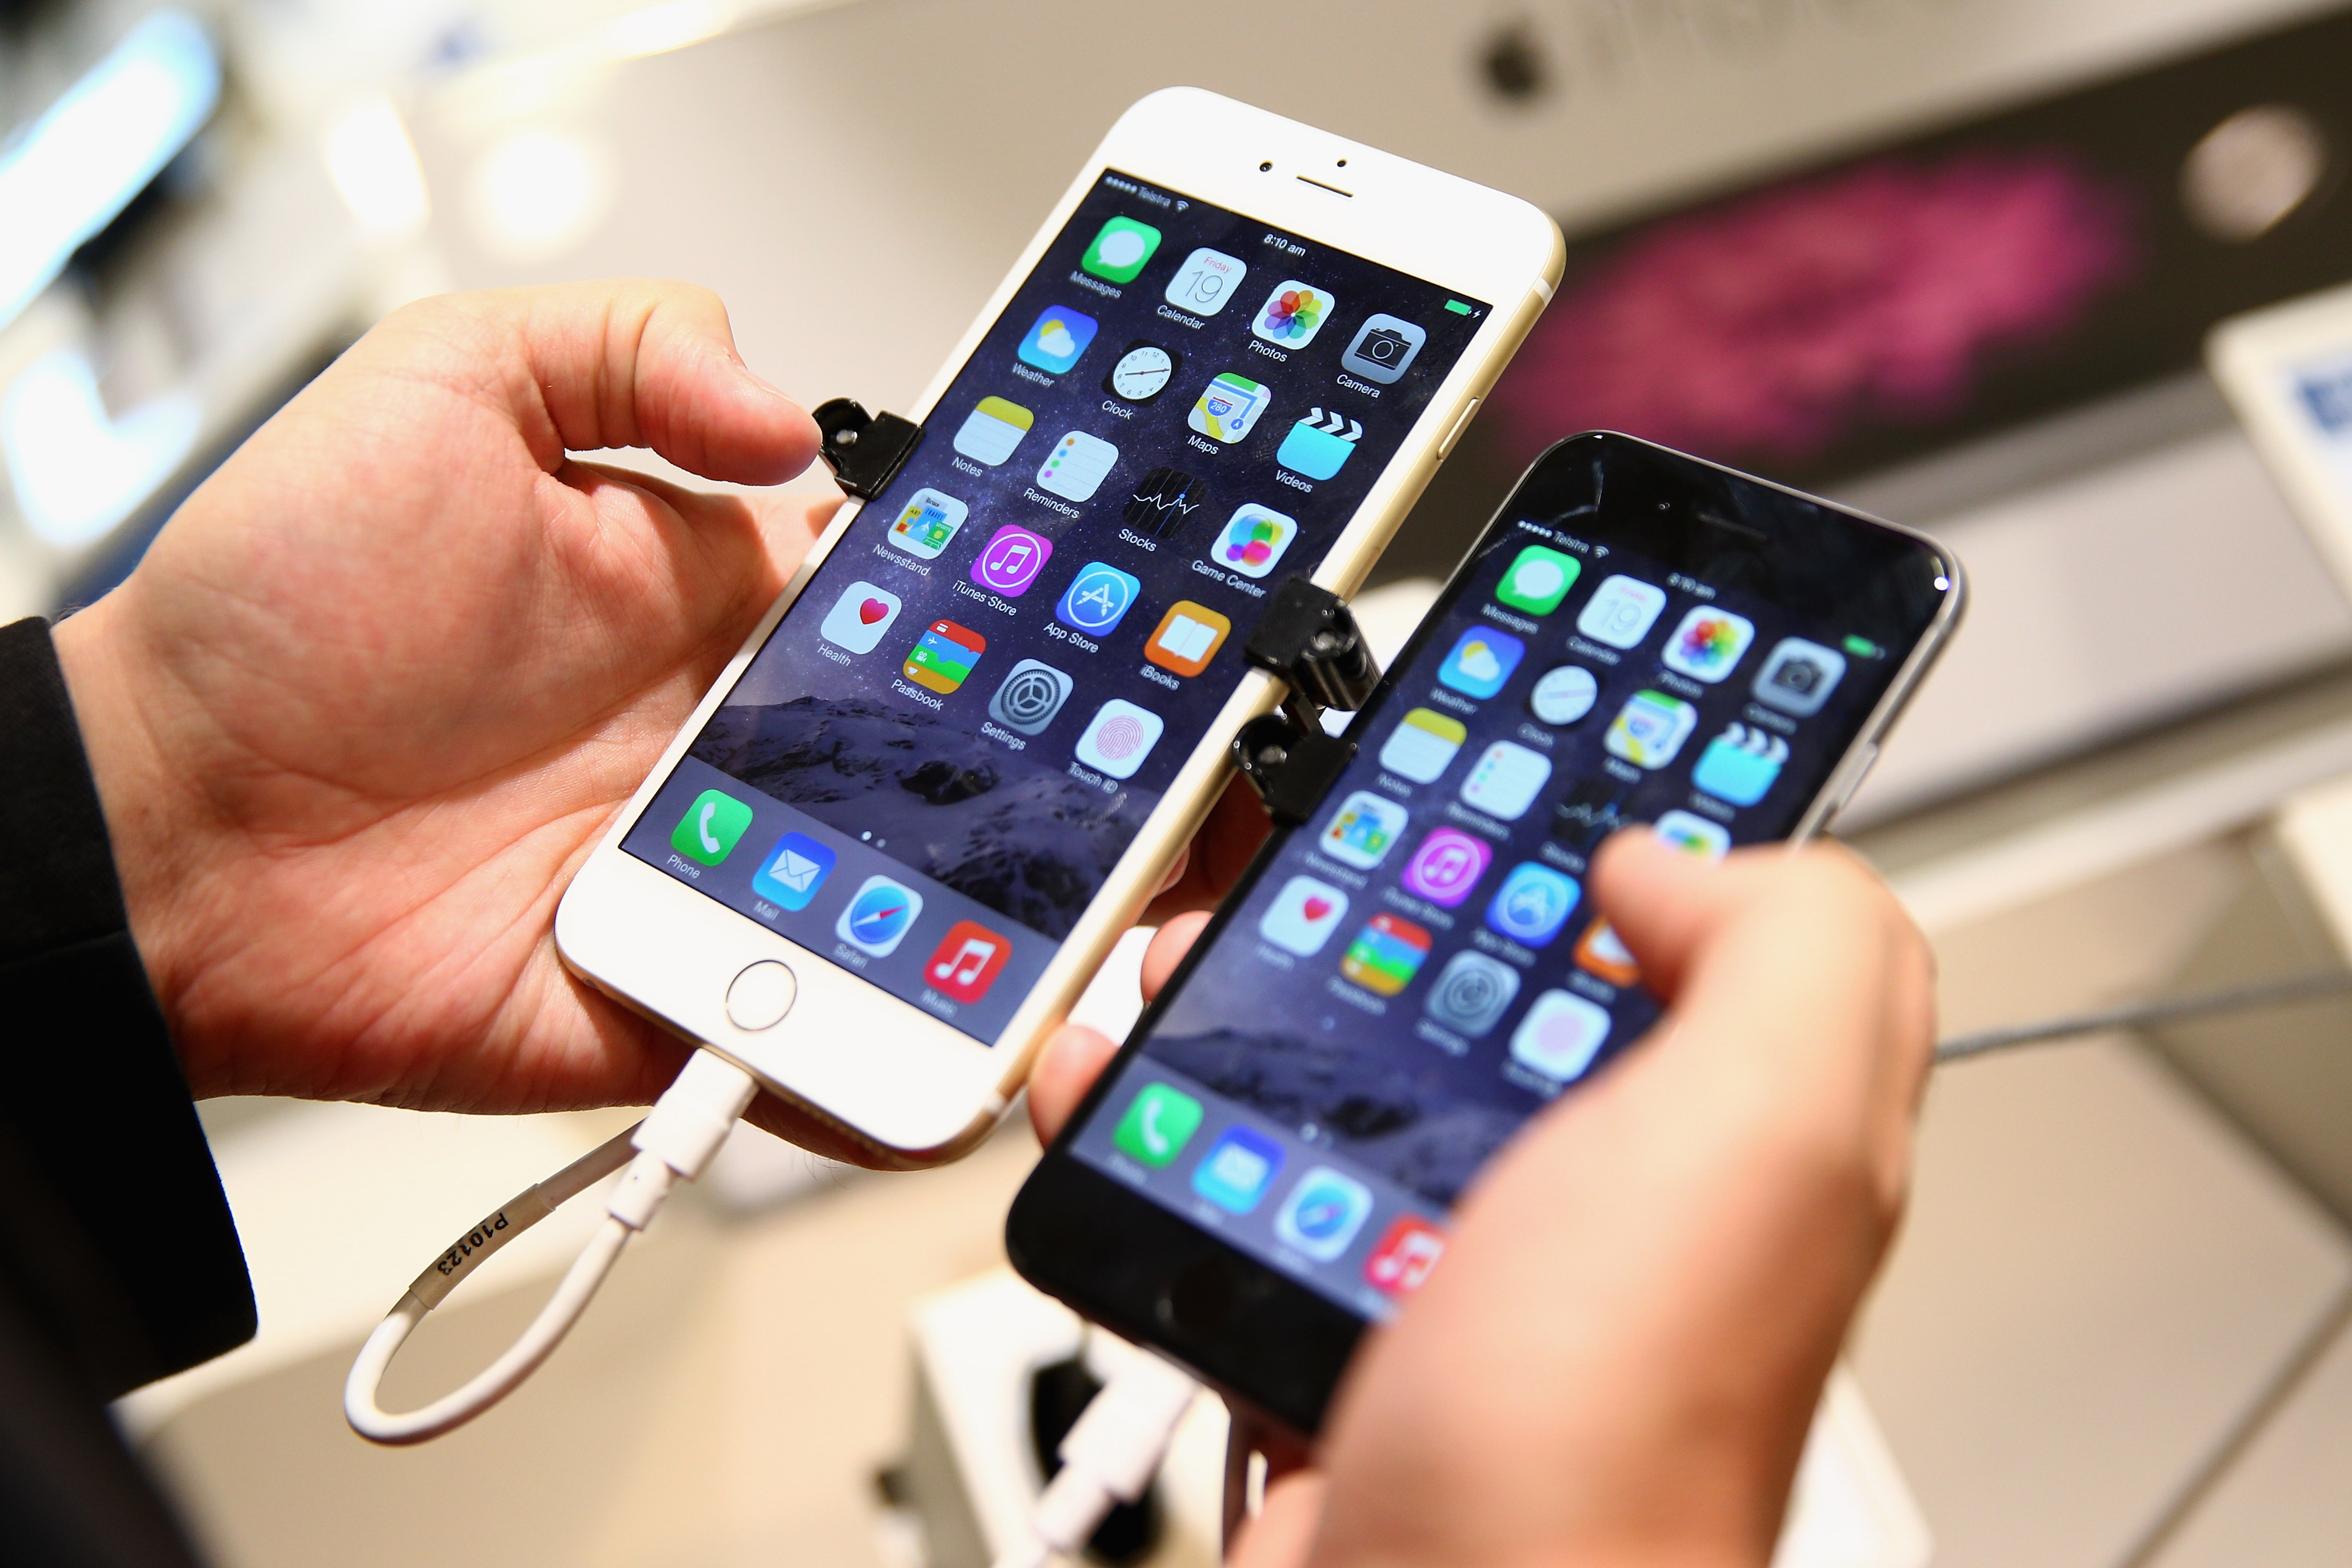 The iPhone 6 Plus and iPhone 6 are compared at a Telstra Store on September 19, 2014 in Sydney, Australia. (Cameron Spencer—Getty Images)